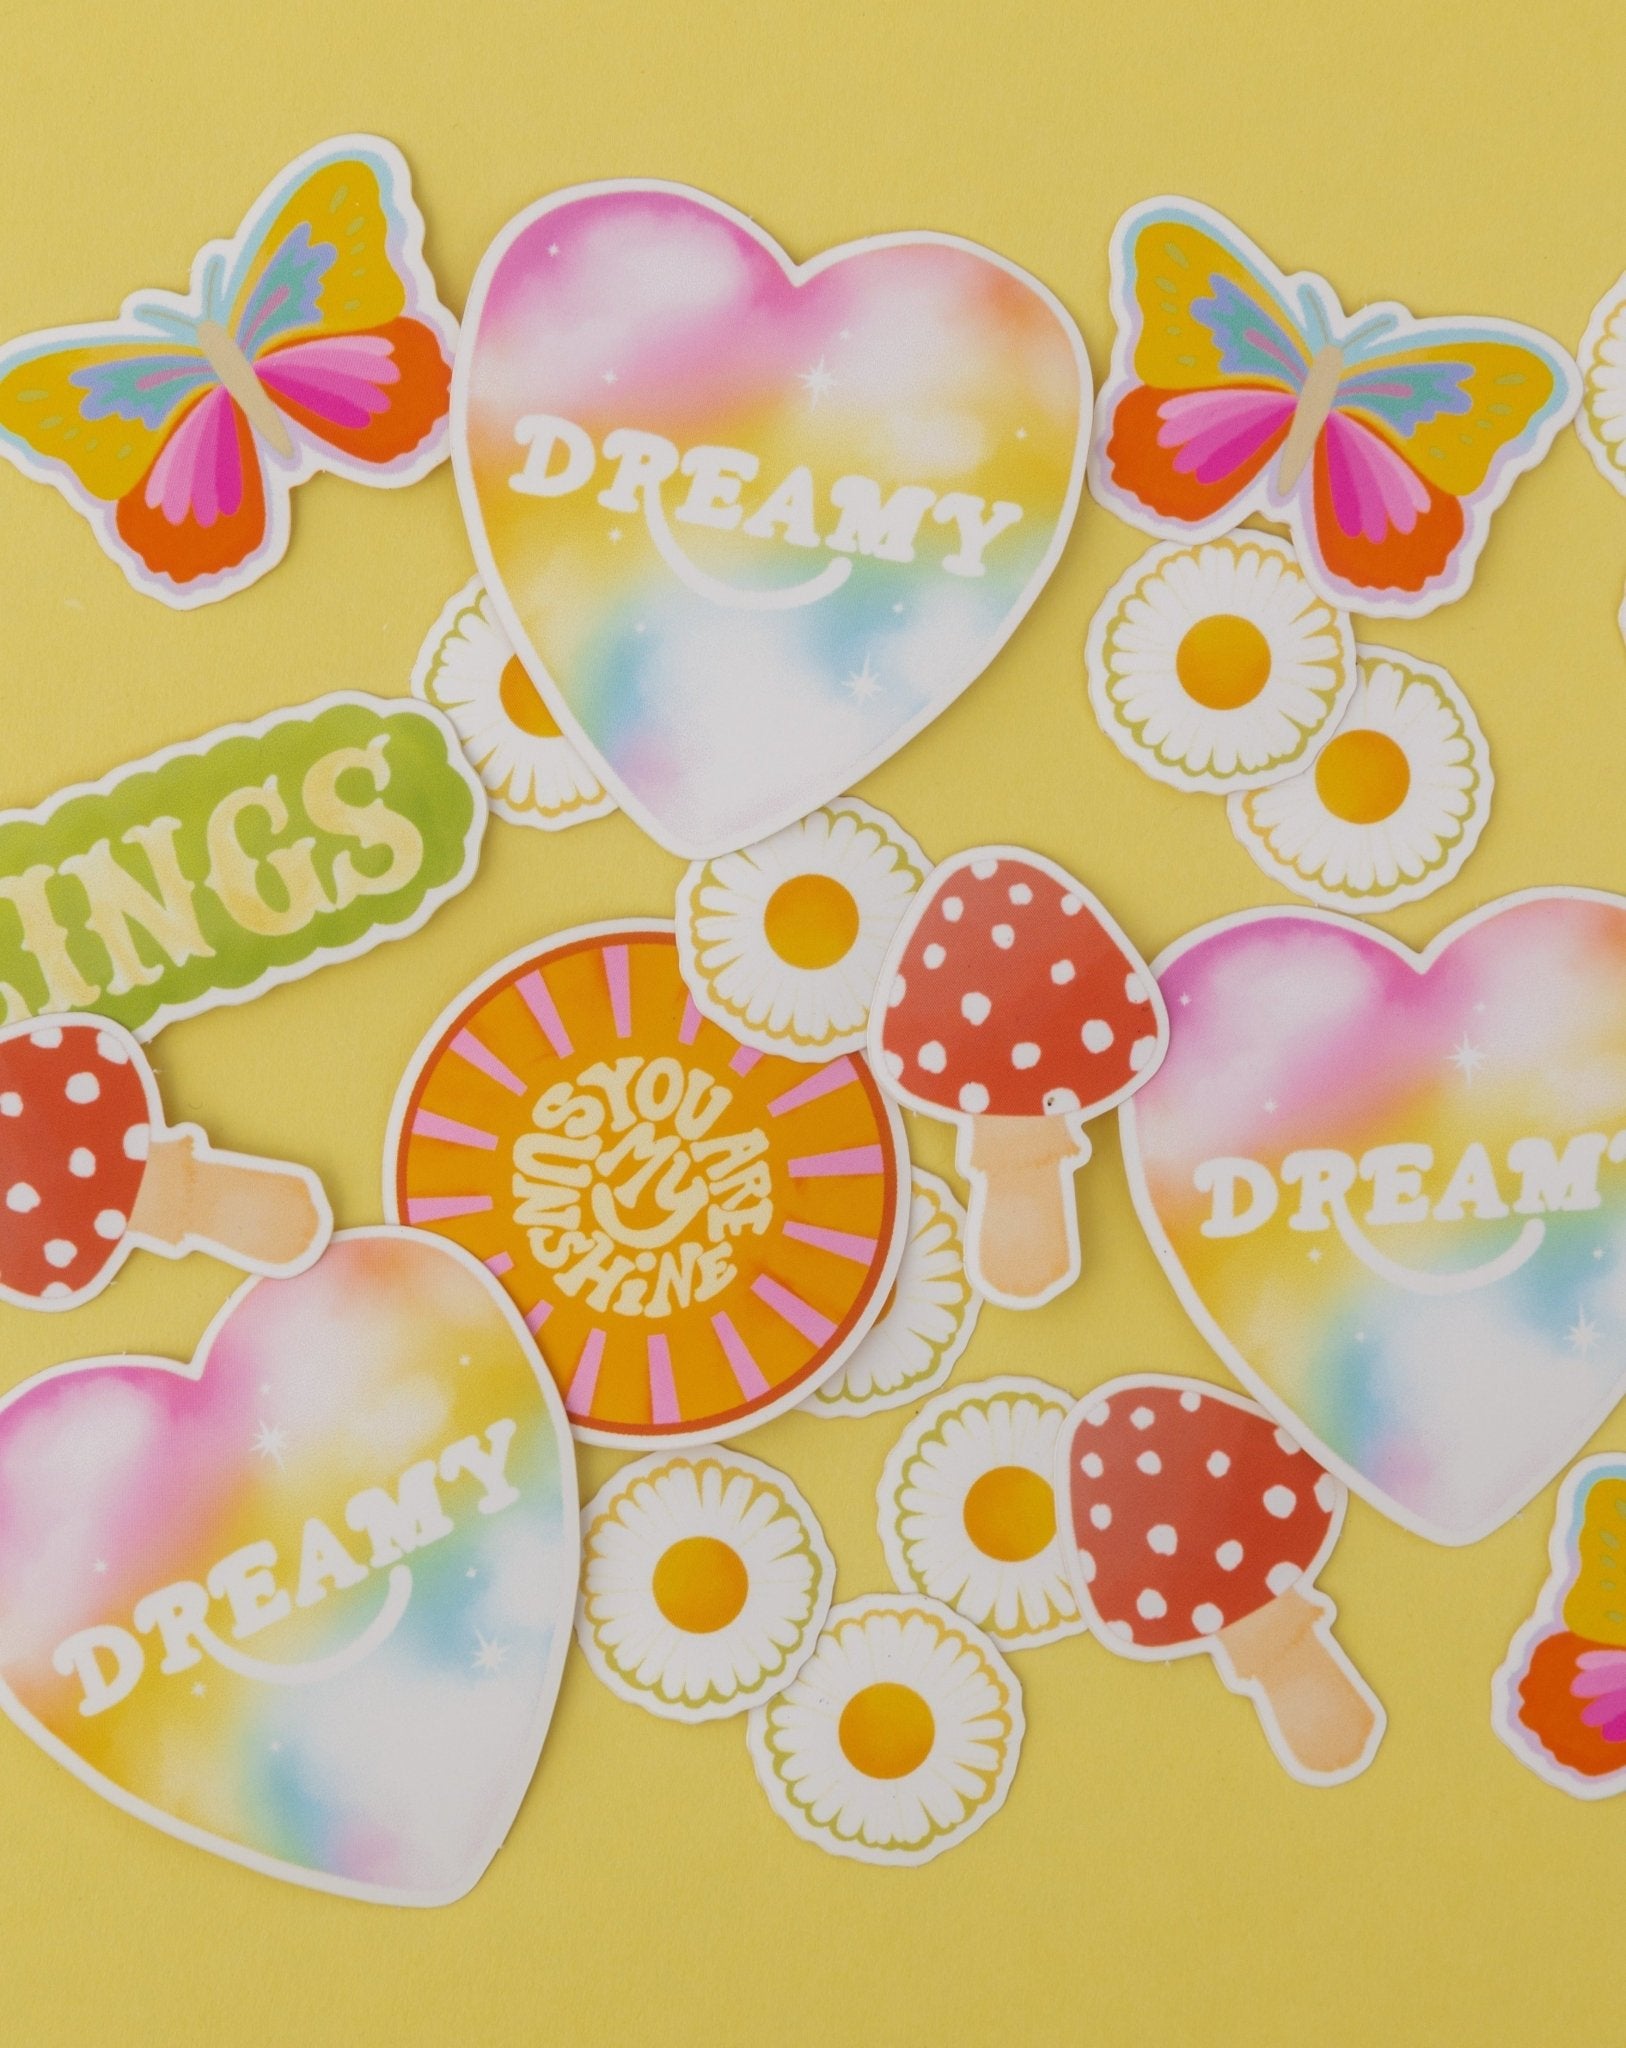 6 new Adelfi stickers: colorful butterfly, the word 'Feelings' in all caps, two daisies, the words 'you are my sunshine' in a sun, red mushroom, and the word 'Dreamy' in a heart.